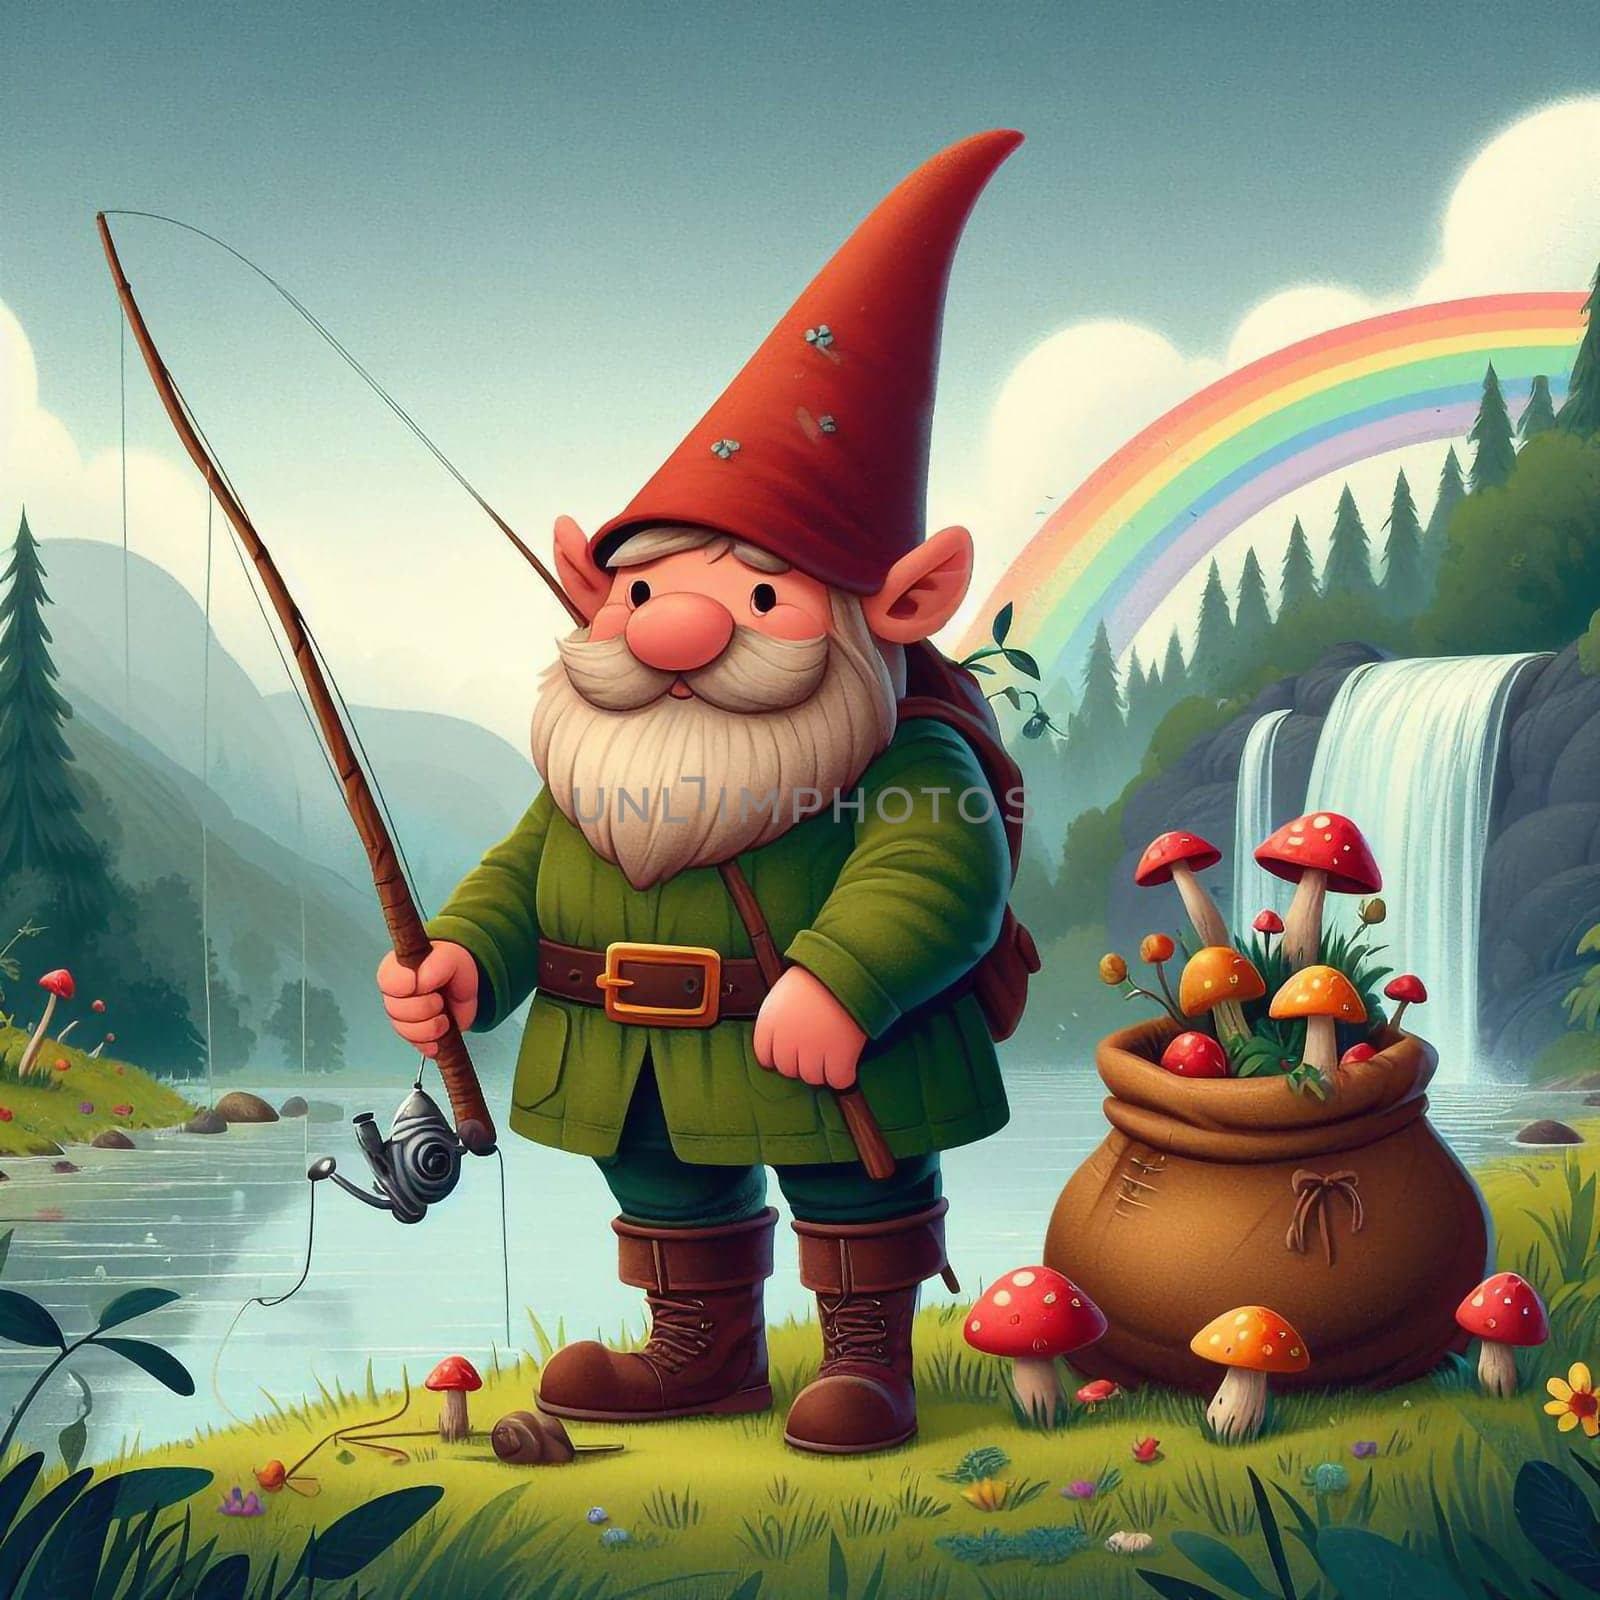 Forest gnome in the nature fairy tale